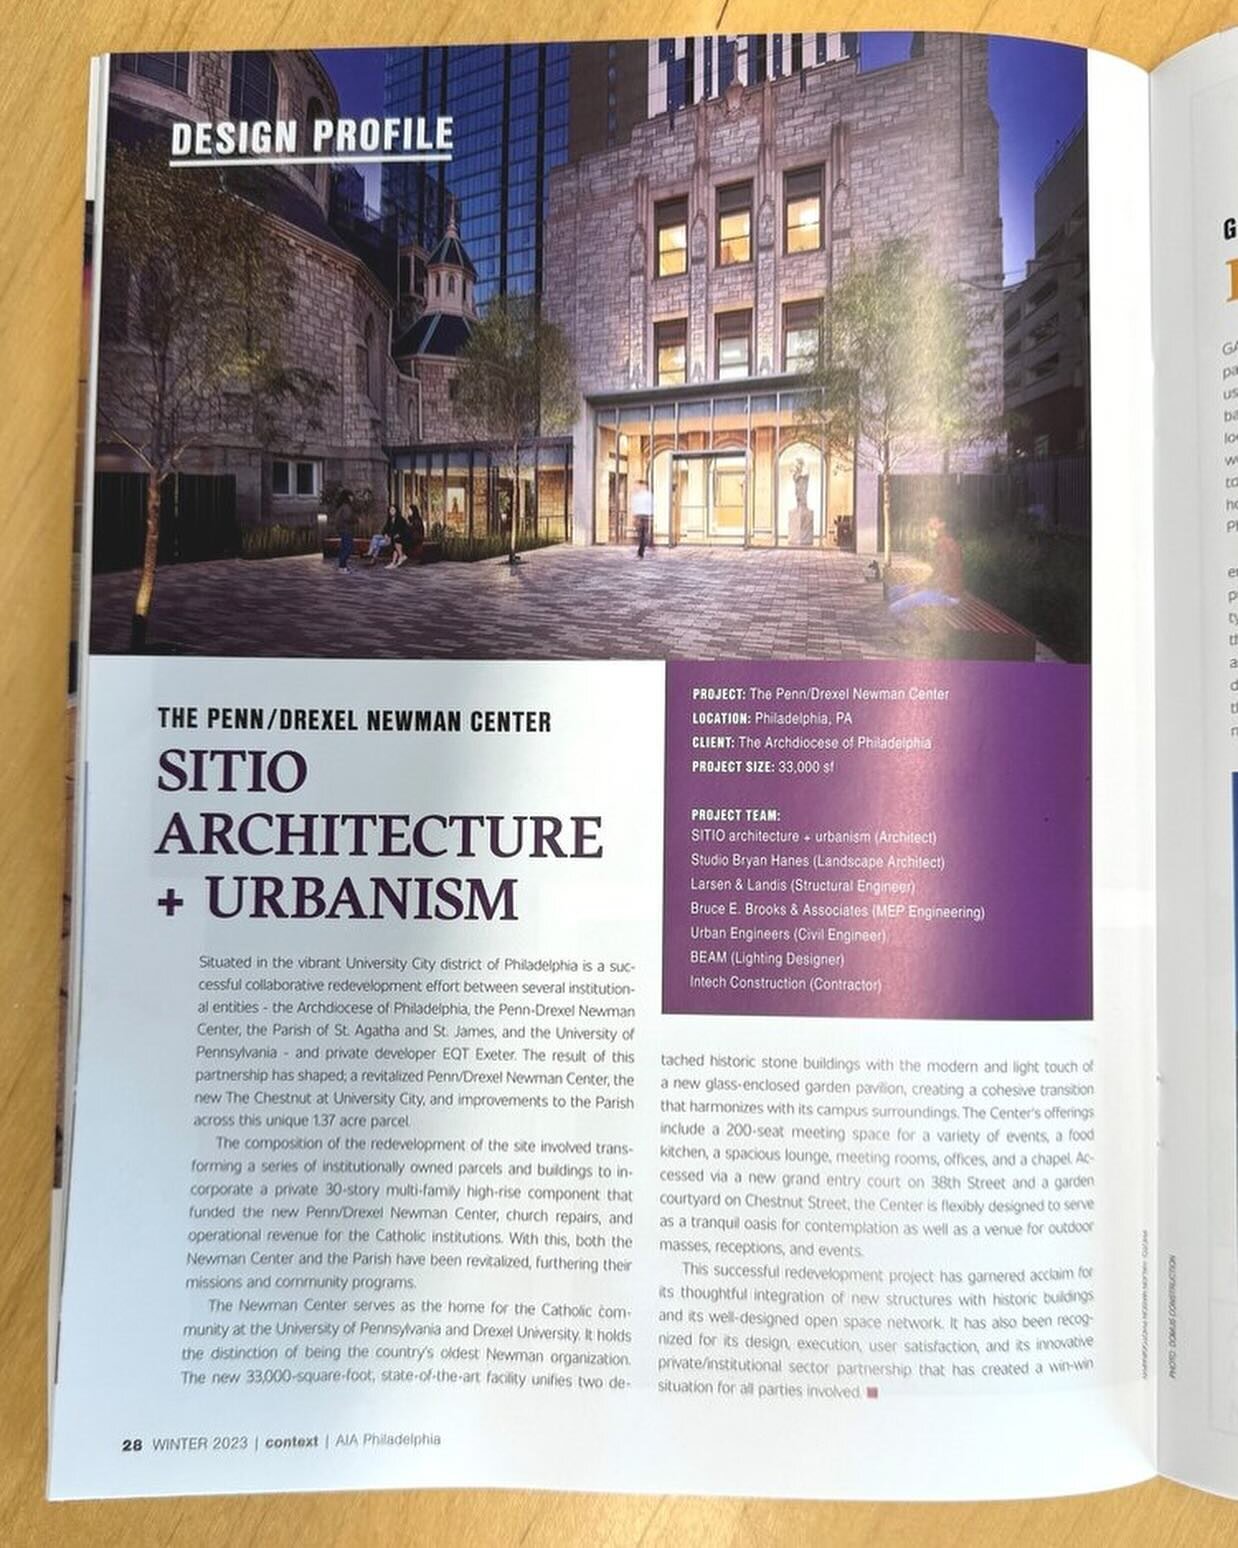 SITIO was showcased in the winter edition of AIA Philadelphia&rsquo;s &lsquo;Context Magazine&rsquo;. SITIO&rsquo;s project, The Penn Drexel Newman Center, was featured for its thoughtful architectural approach in blending new and existing structures